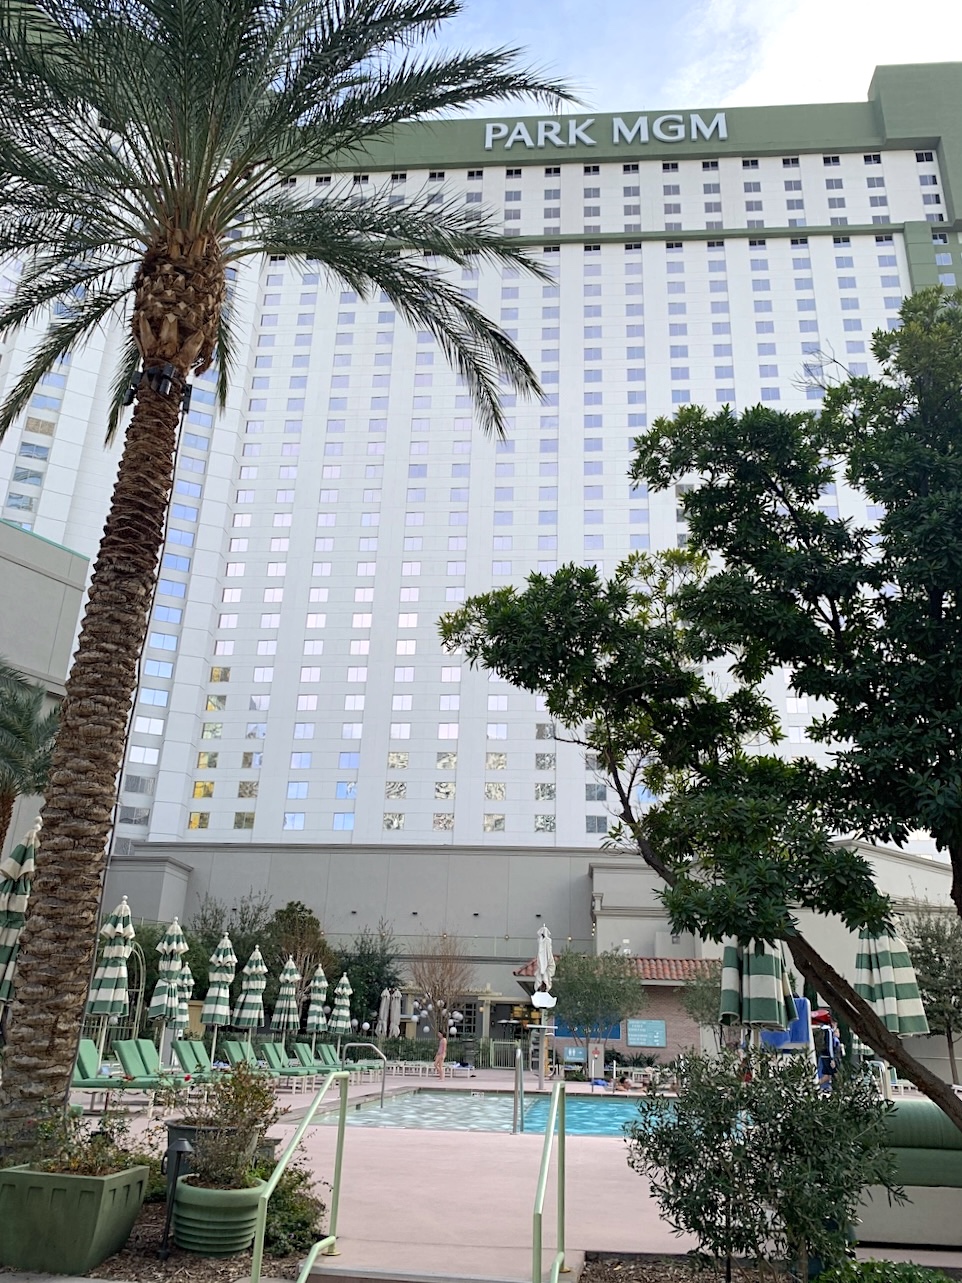 The Park MGM Las Vegas Hotel and Casino